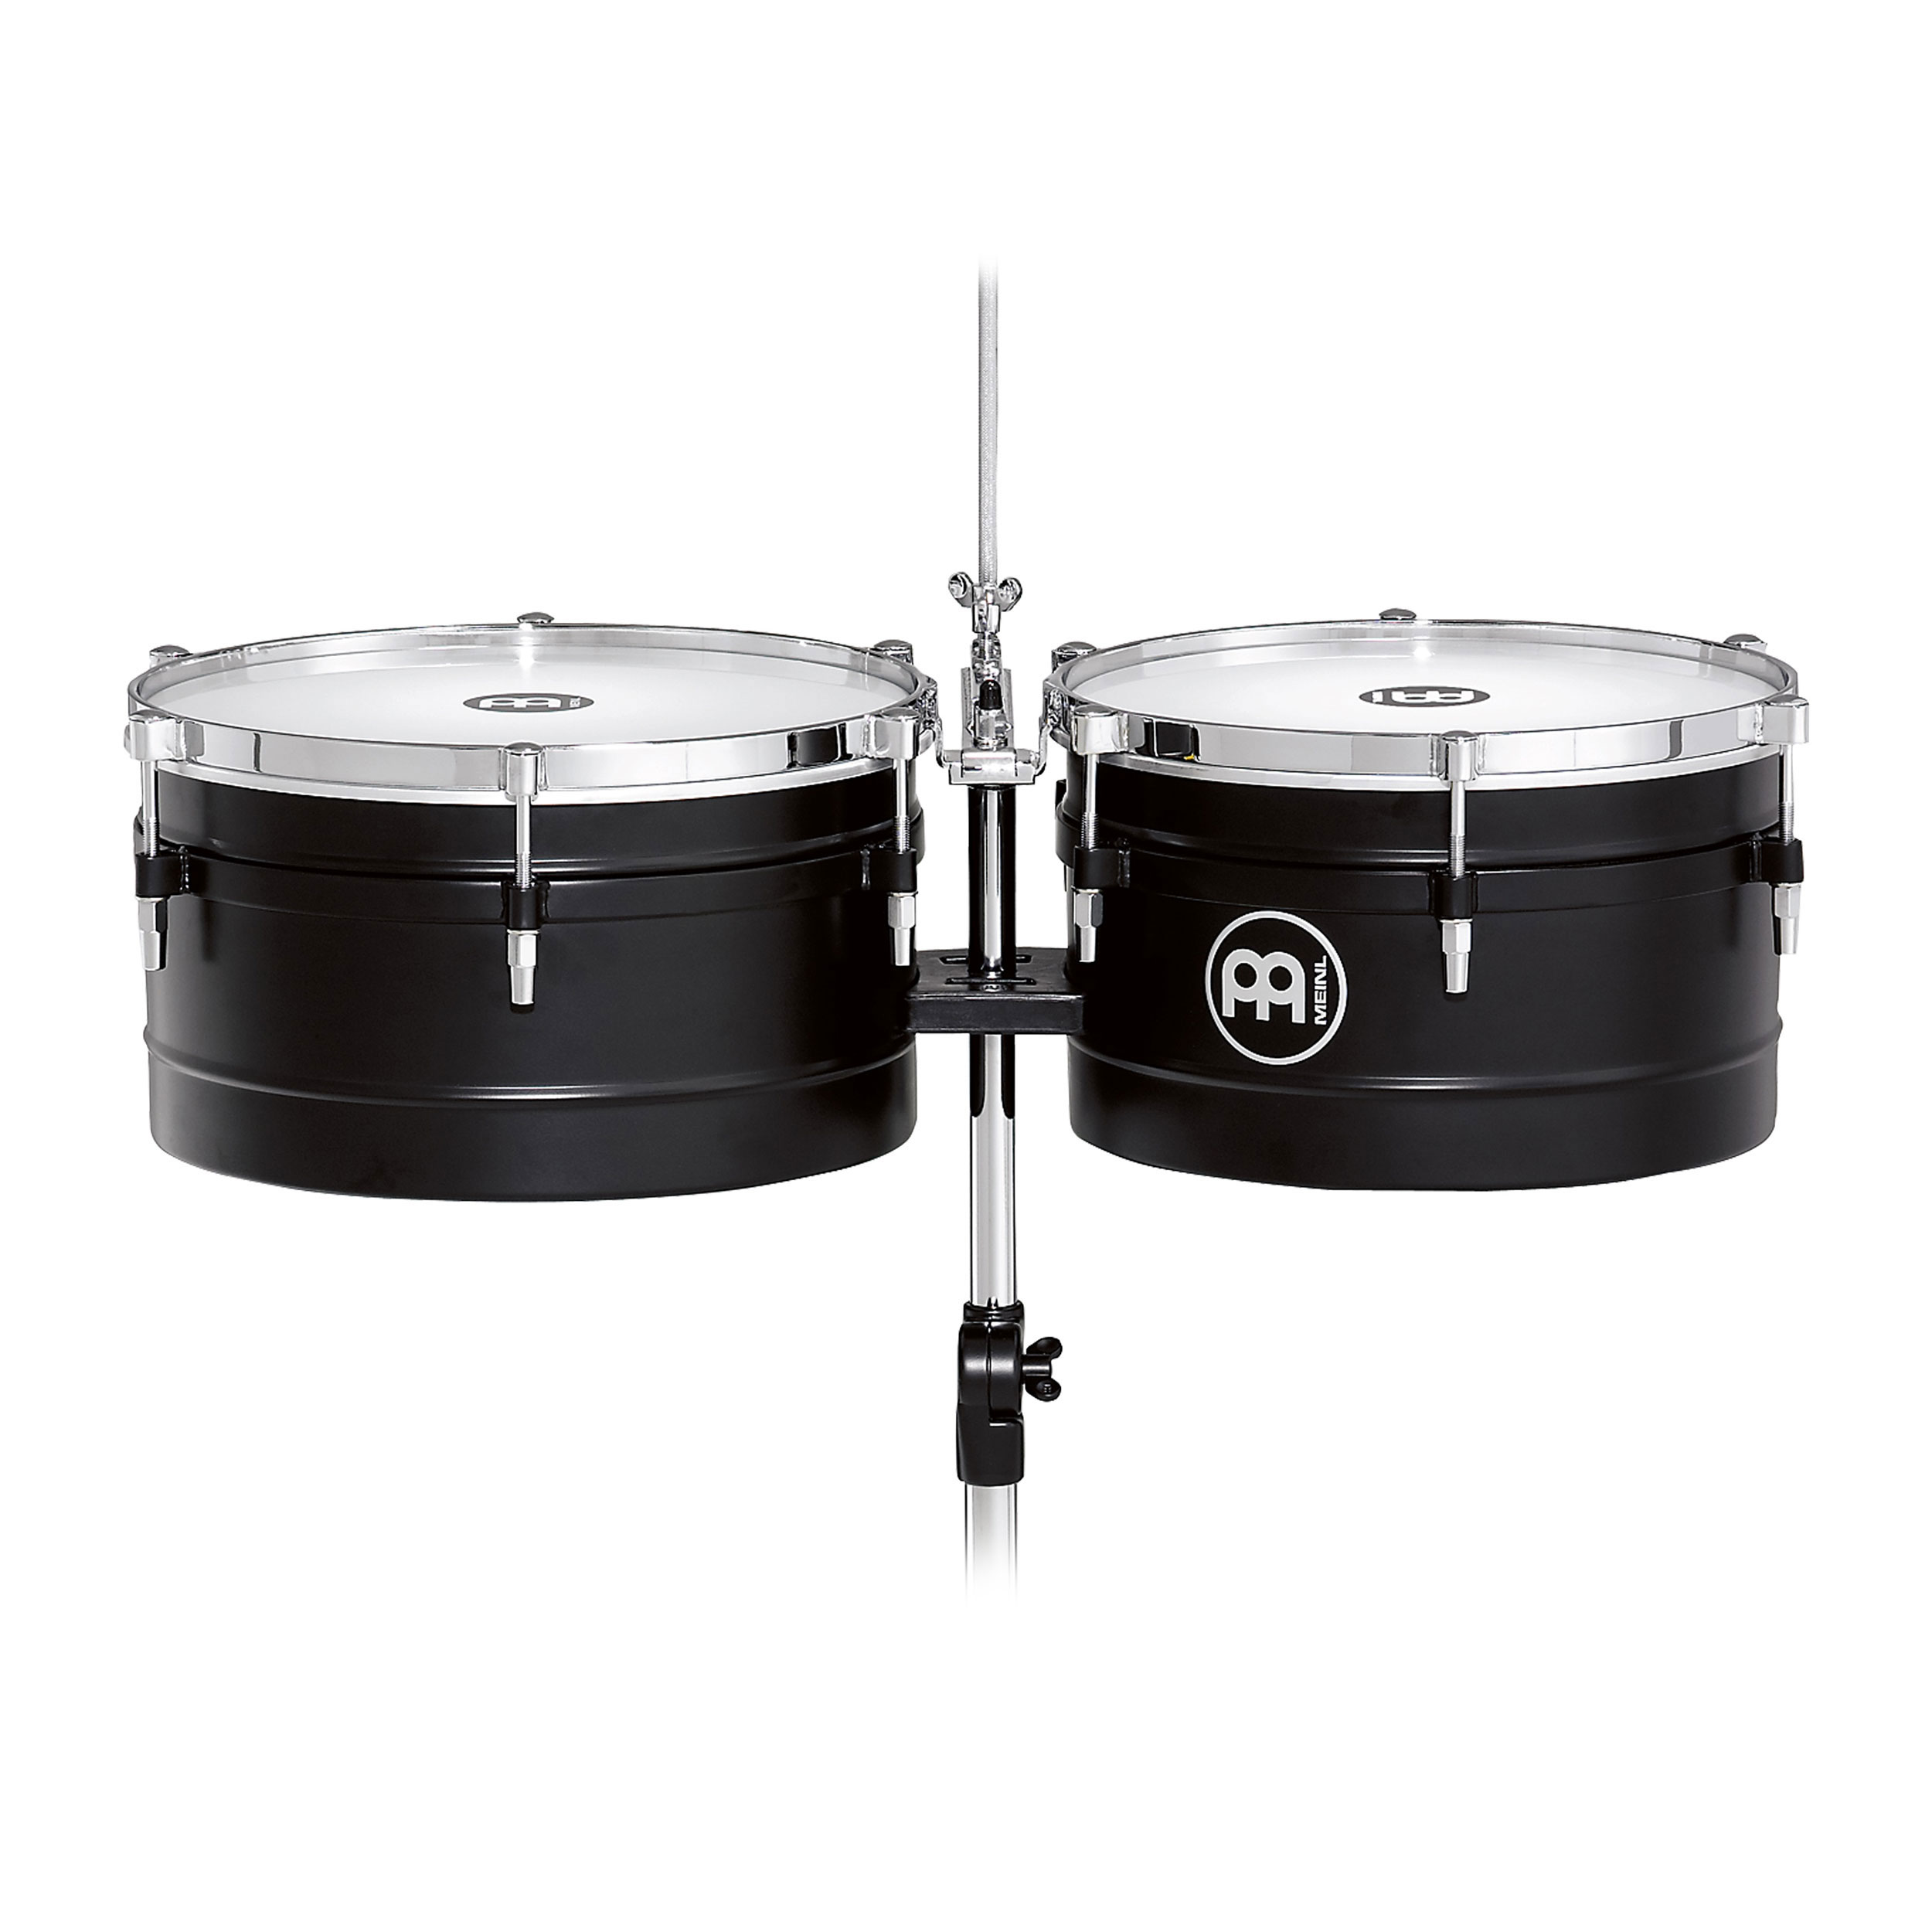 Meinl MT1415BN Timbales Percussion تیمبالس ماینل